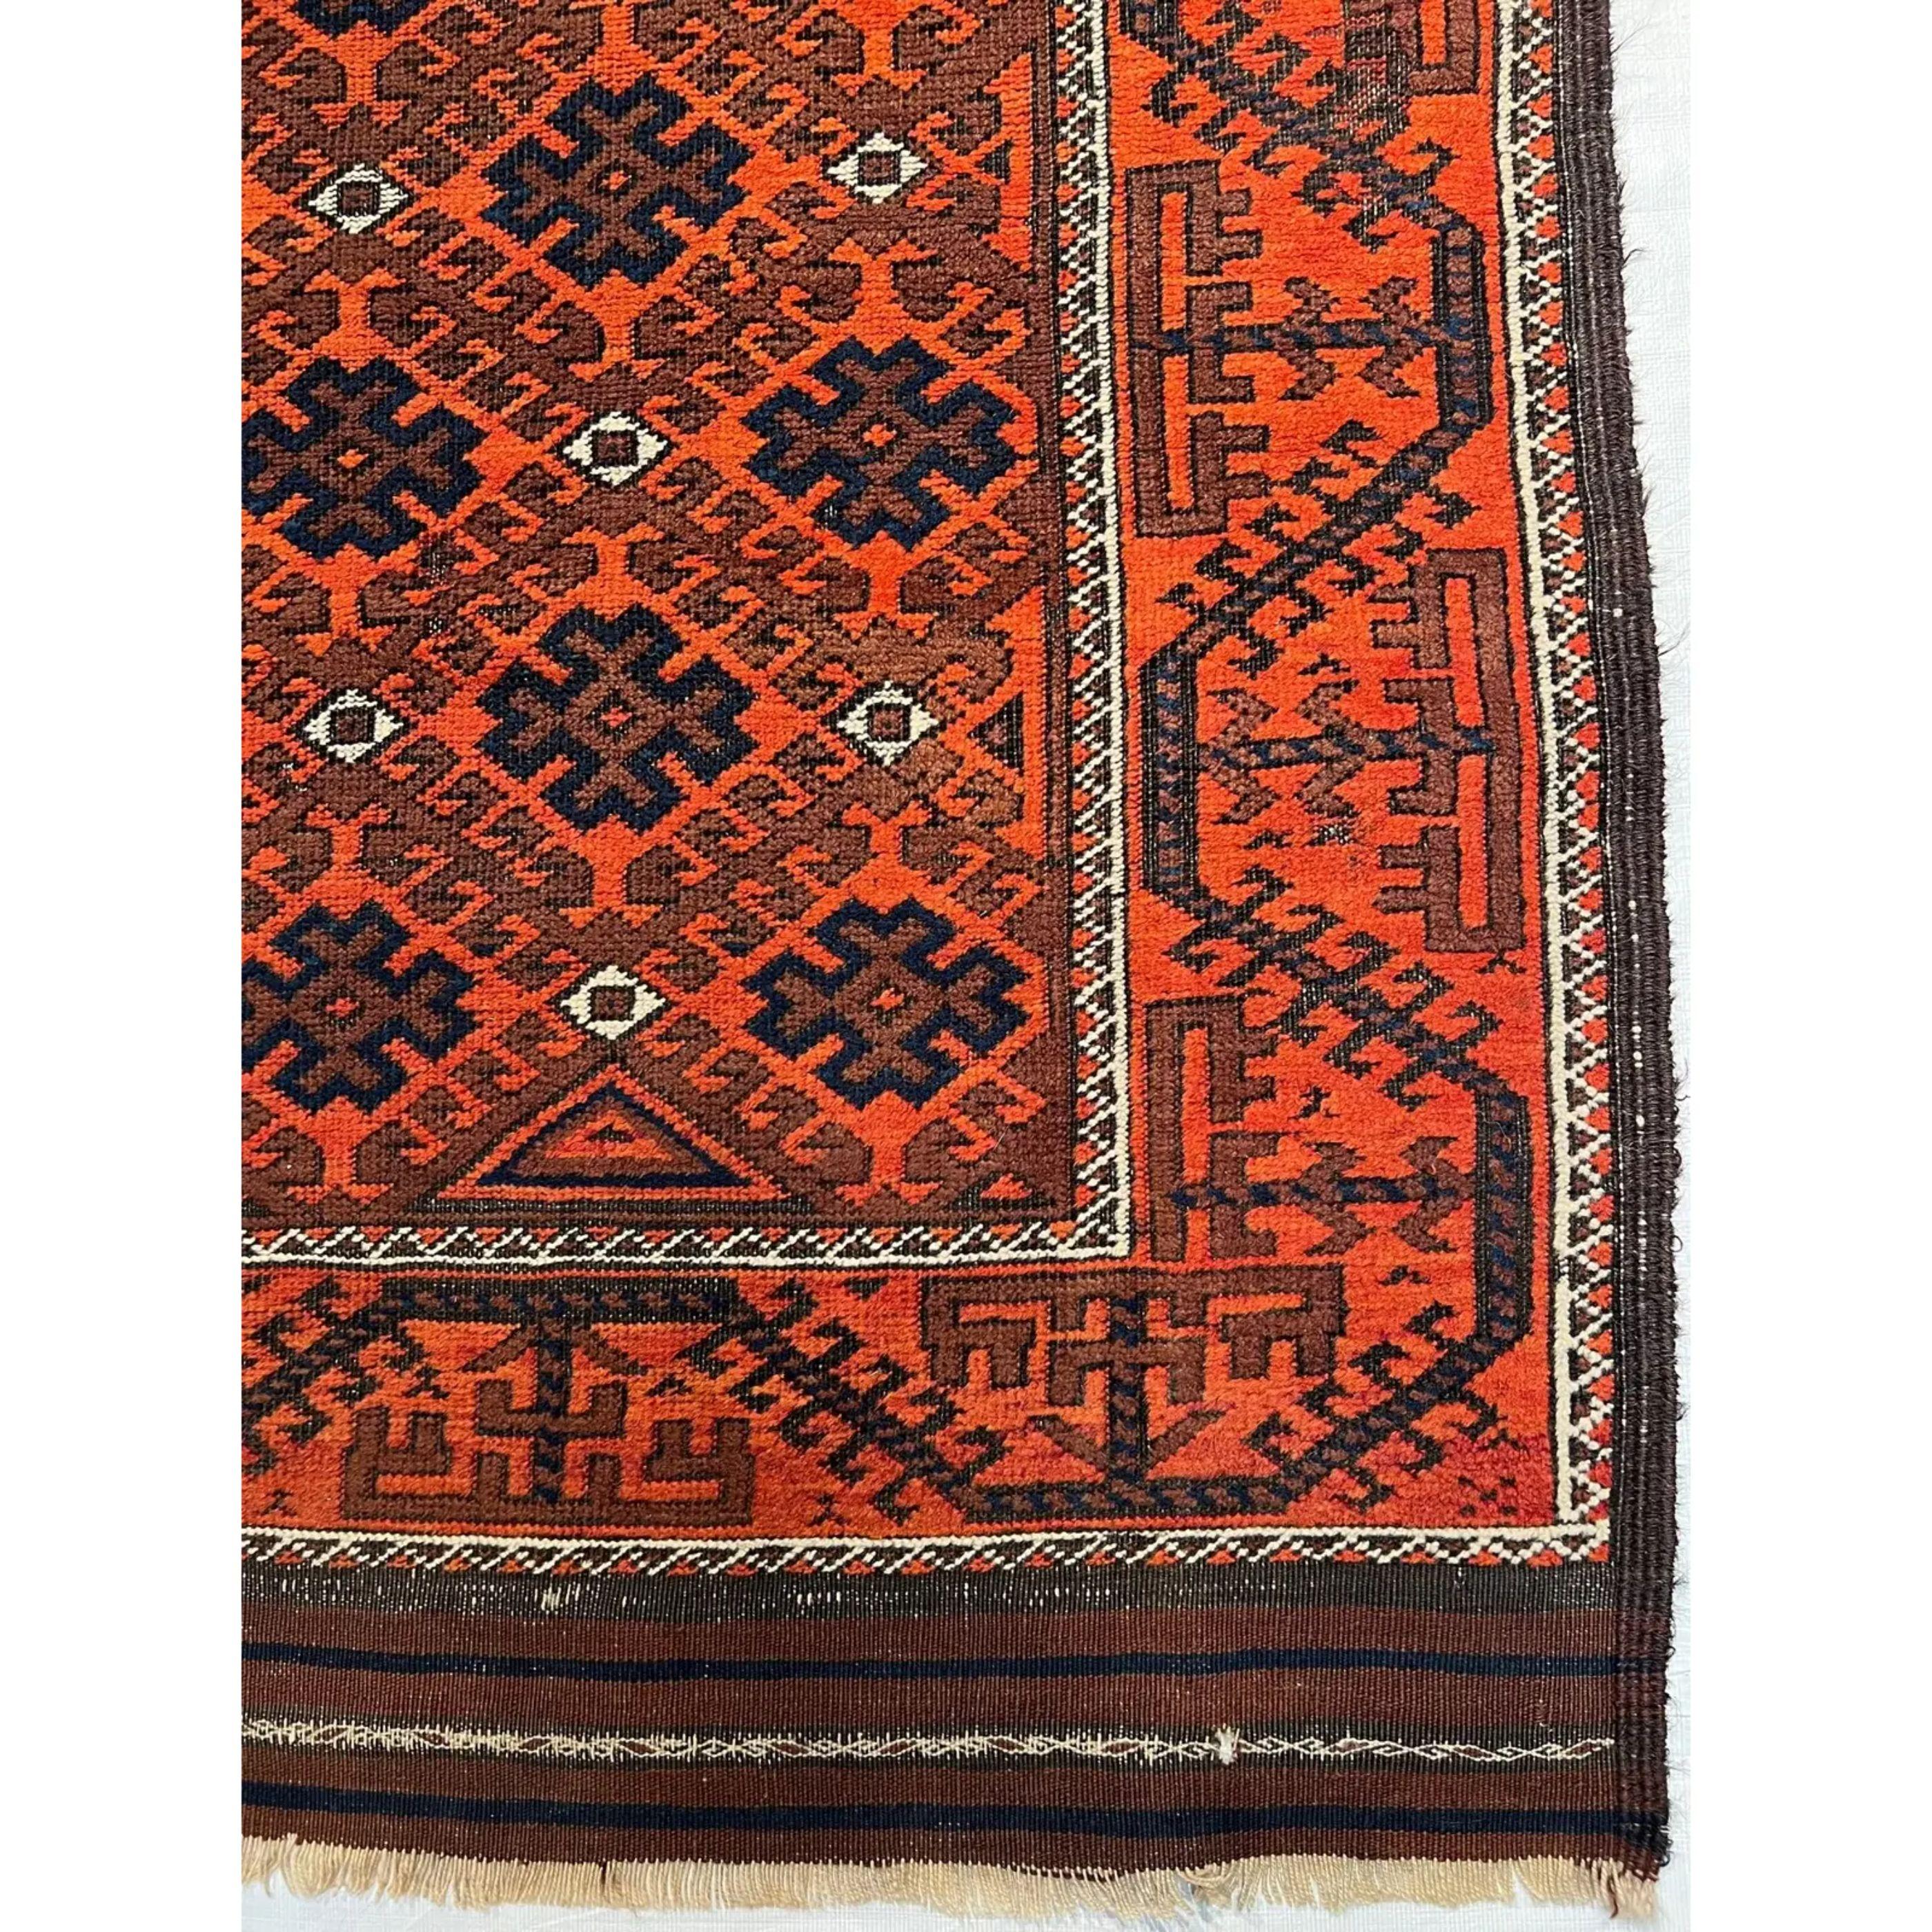 Tribal 1900s Antique Persian Baloutch Rug For Sale